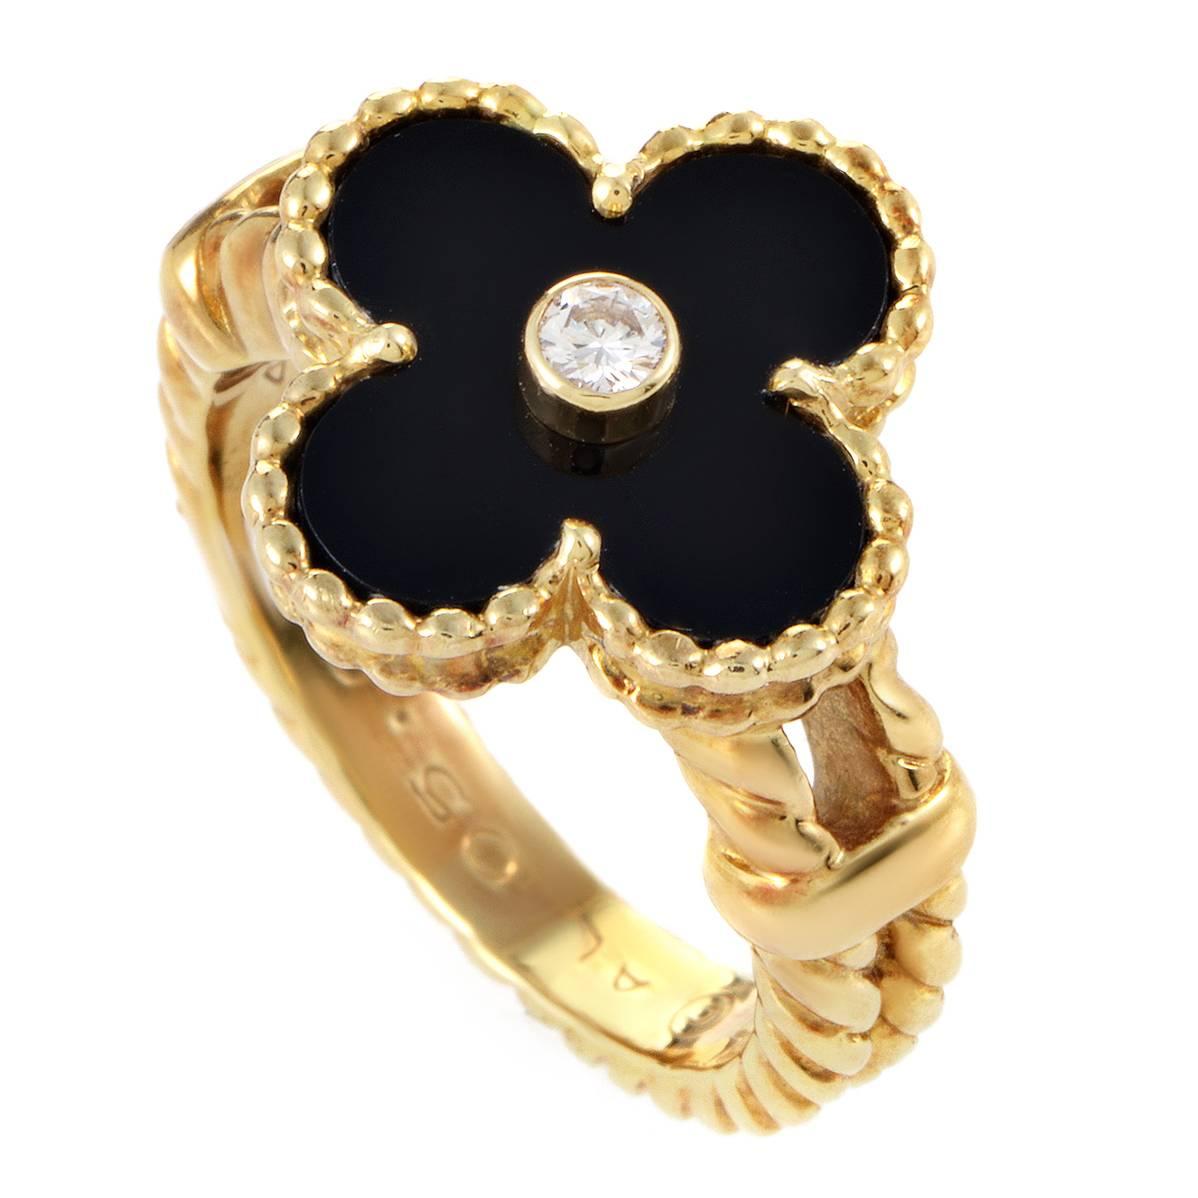 Van Cleef & Arpels Alhambra Diamond and Onyx Gold Ring